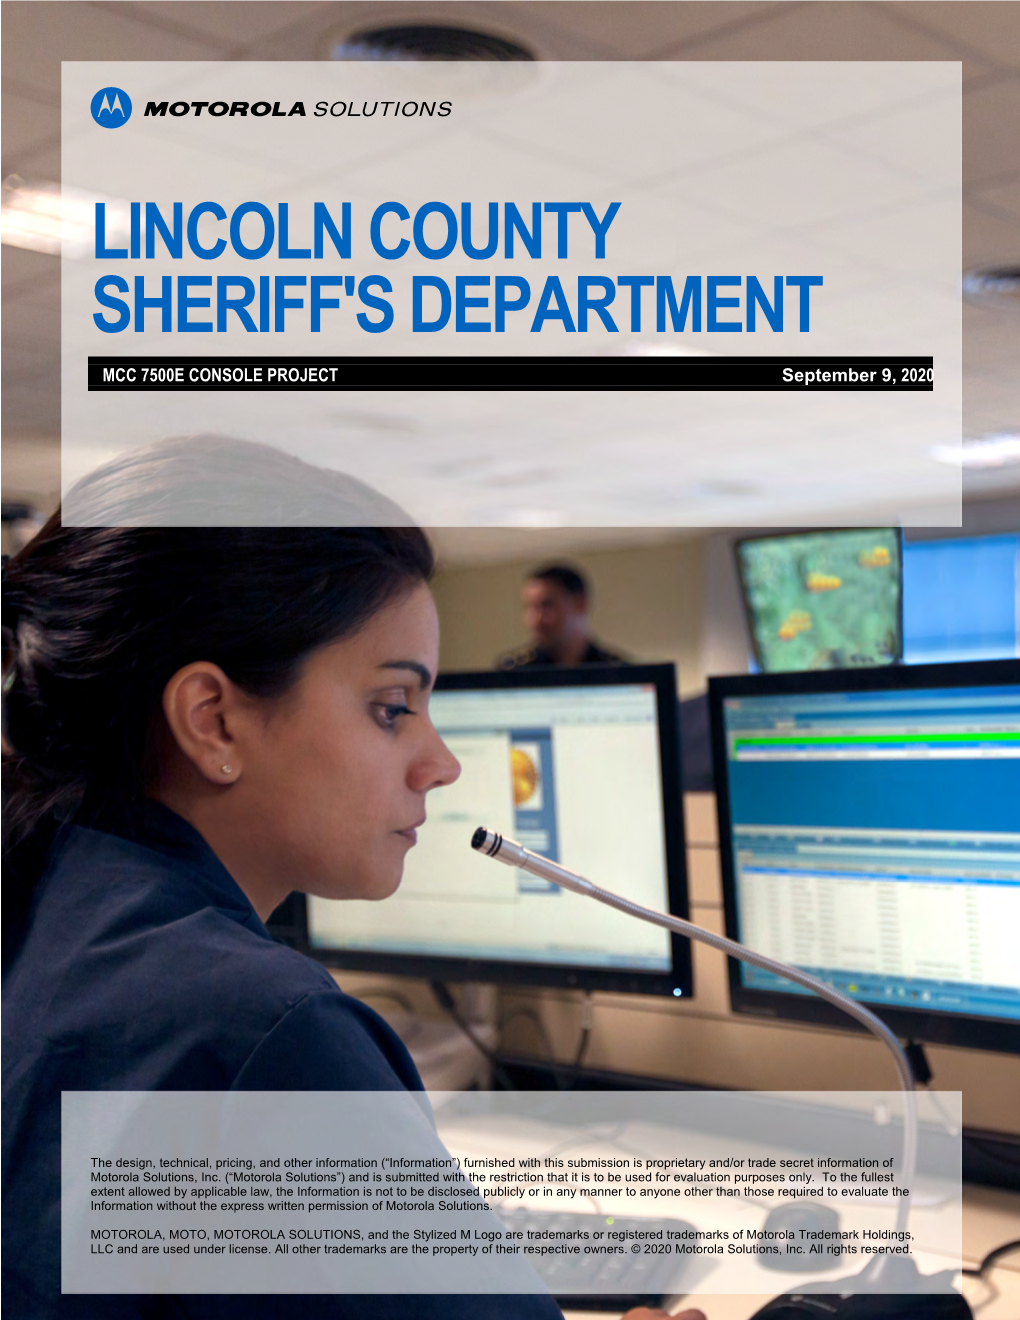 Lincoln County Sheriff's Department